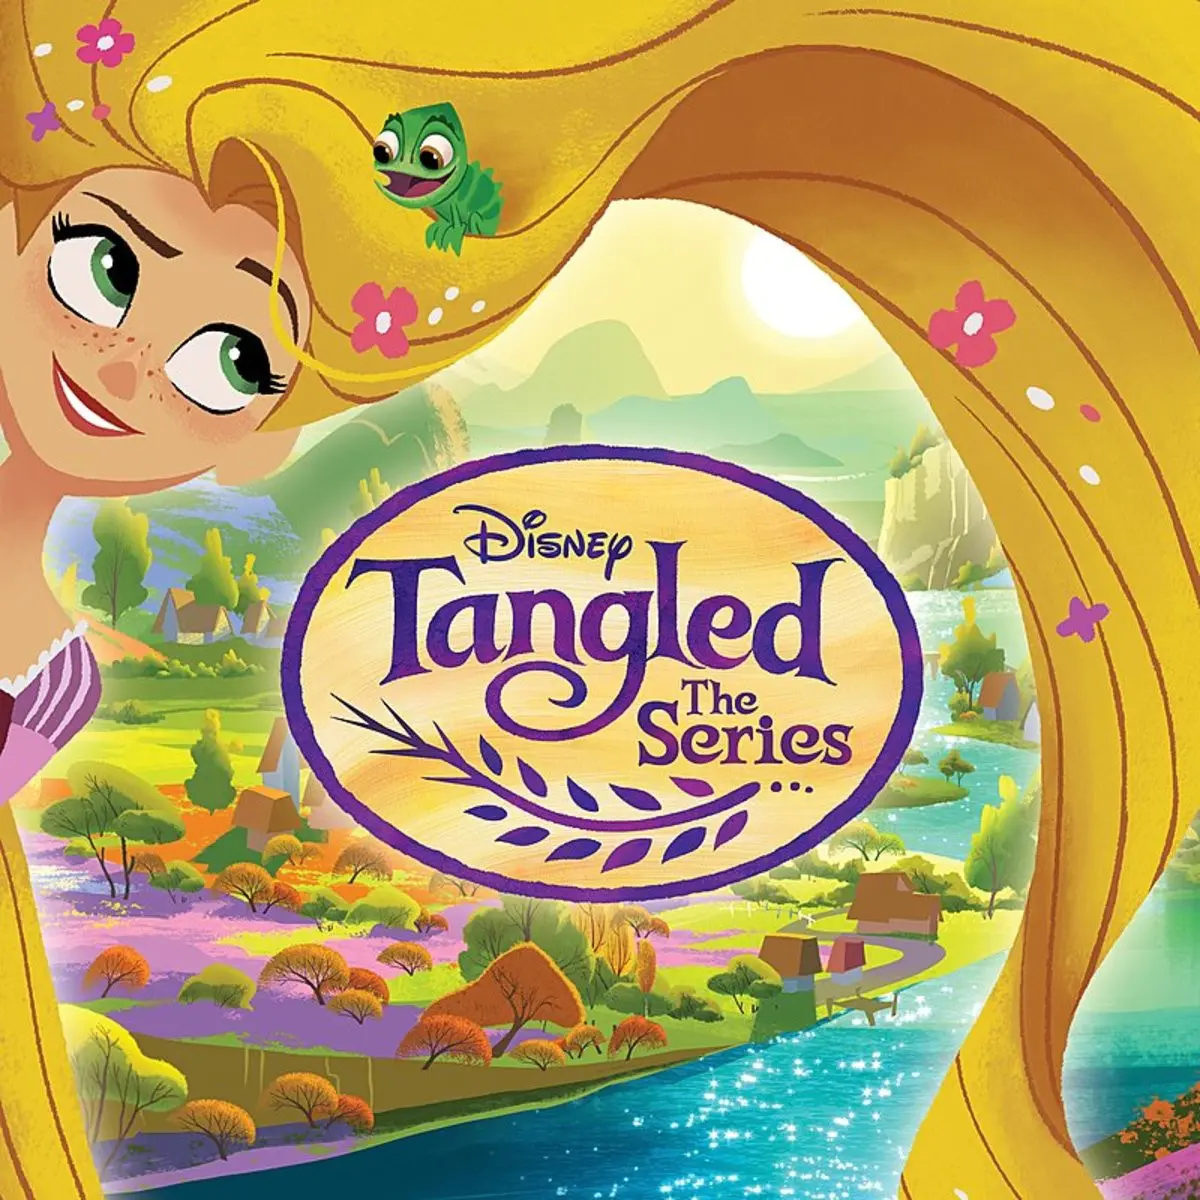 Life After Happily Ever After Lyrics In English Tangled The Series Music From The Tv Series Life After Happily Ever After Song Lyrics In English Free Online On Gaana Com